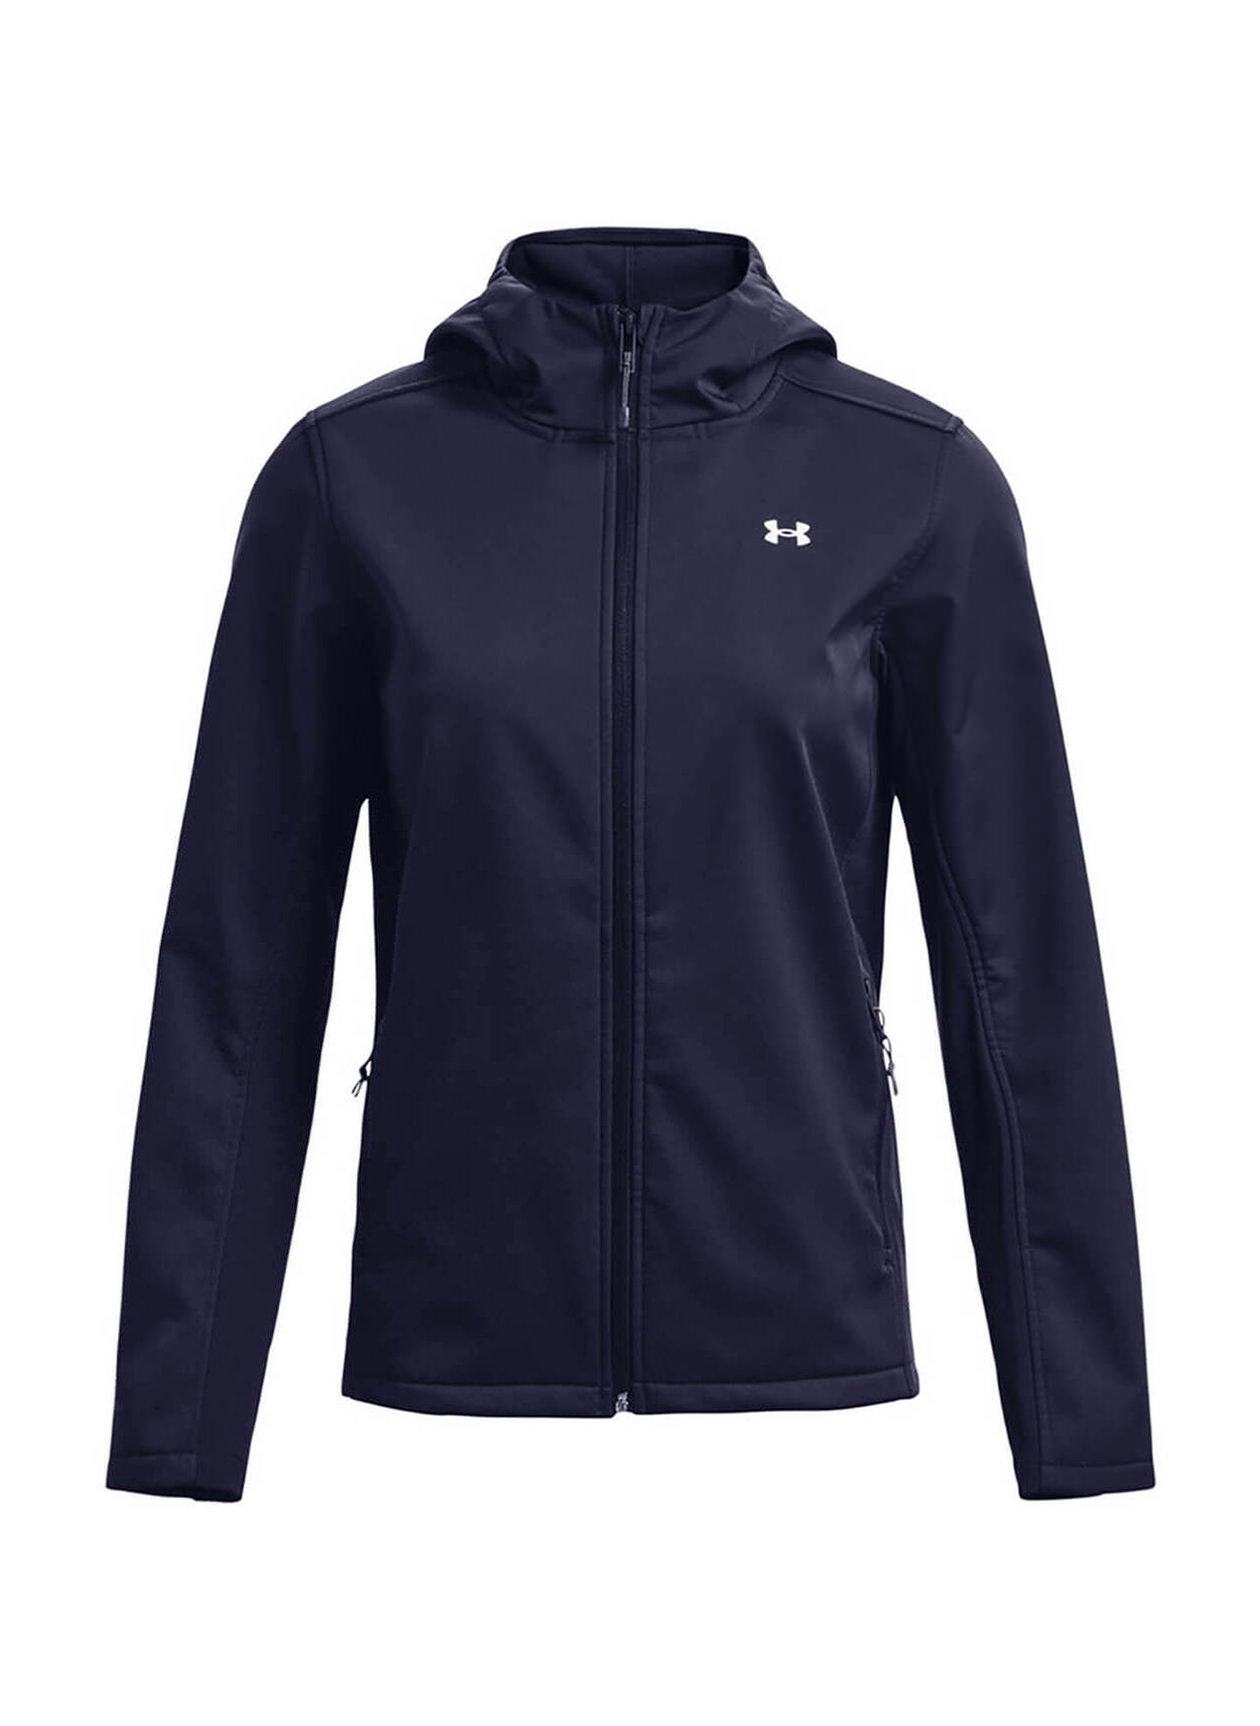 Under Armour Women's Navy / White ColdGear Infrared Shield 2.0 Hooded Jacket